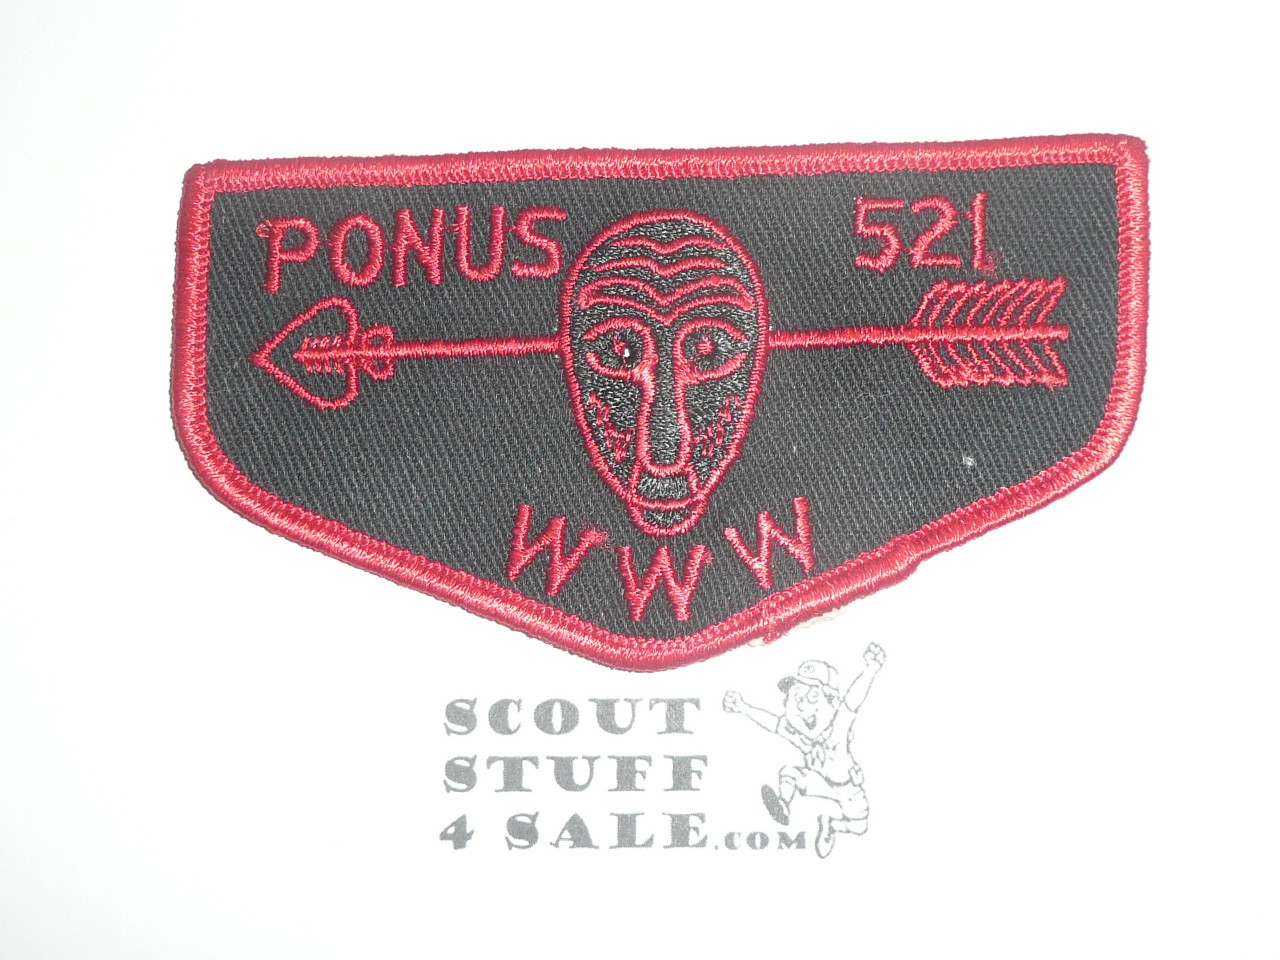 Order of the Arrow Lodge #521 Ponus f2a Flap Patch